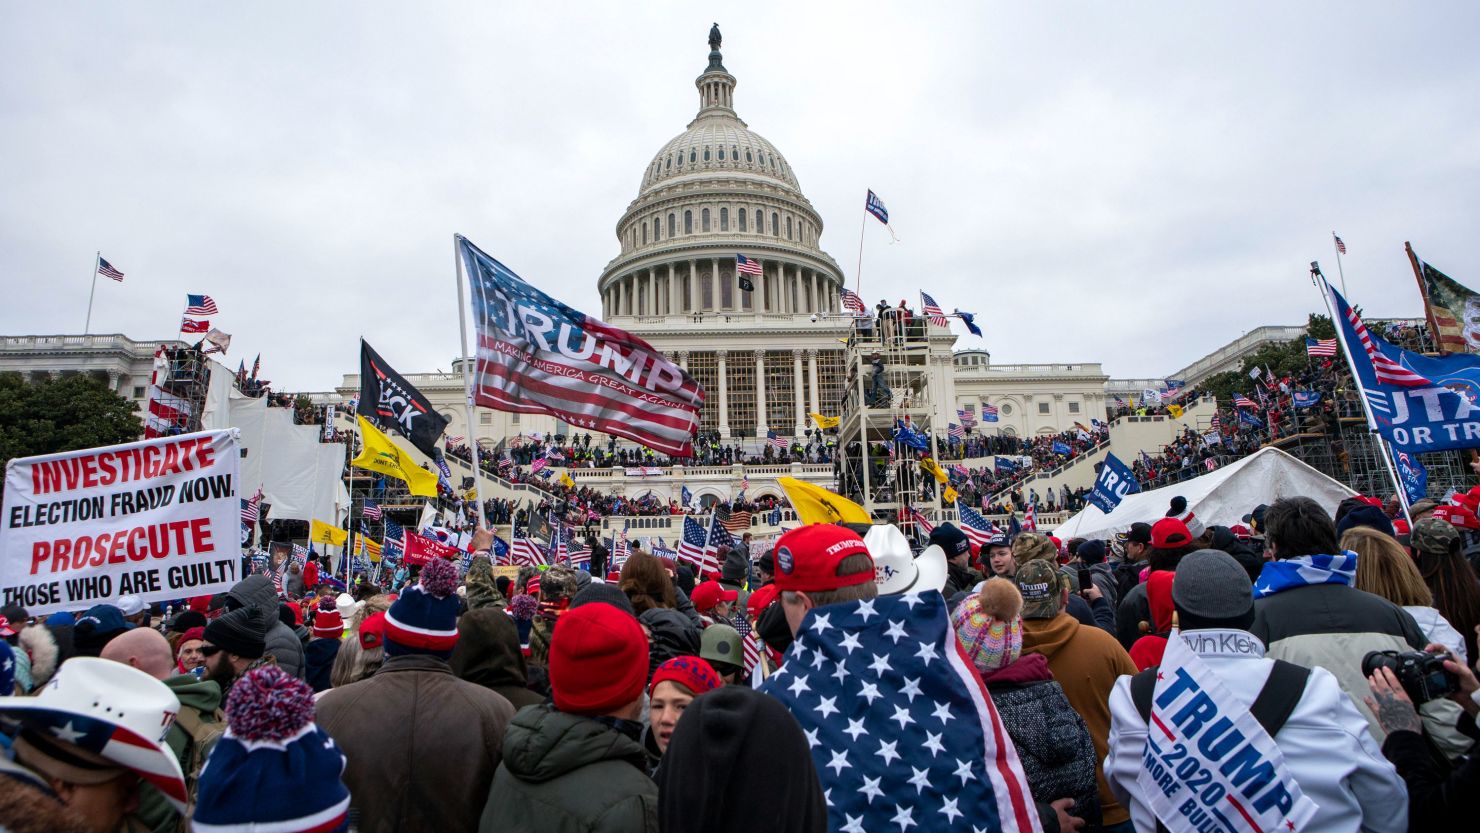 FILE - Insurrectionists loyal to President Donald Trump rally at the U.S. Capitol on Jan. 6, 2021, in Washington. Nathan Donald Pelham, 40, a Texas man who agreed to surrender on charges from taking part in the U.S. Capitol riot, but later that day fired a gun toward sheriff's deputies who went to his house in response to a welfare call, was arrested Tuesday, April 18, federal prosecutors said Thursday, April 20, 2023.  Pelham, 40, allegedly fired the shots from his rural home on April 12, the same day he was told he was charged with four misdemeanors for allegedly participating in the Jan. 6 attack. In addition, he was charged with being a felon in possession of a firearm, prosecutors said.
(AP Photo/Jose Luis Magana, File)